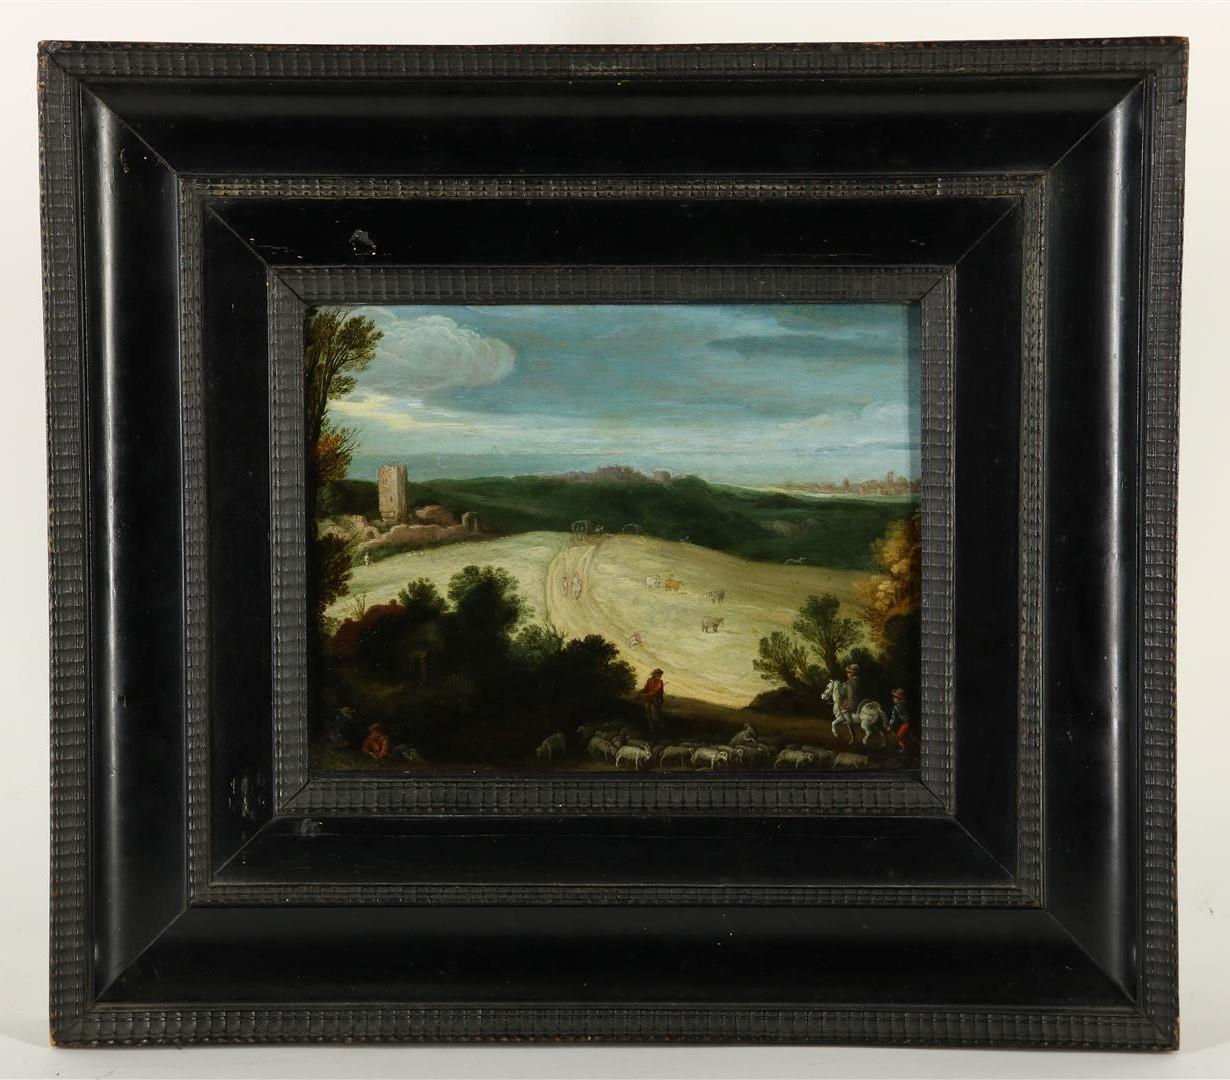 Atelier Paul Bril (1554-1626) Atelier Paul Bril (ca.1620) "Landscape with herds, travelers and - Image 2 of 7